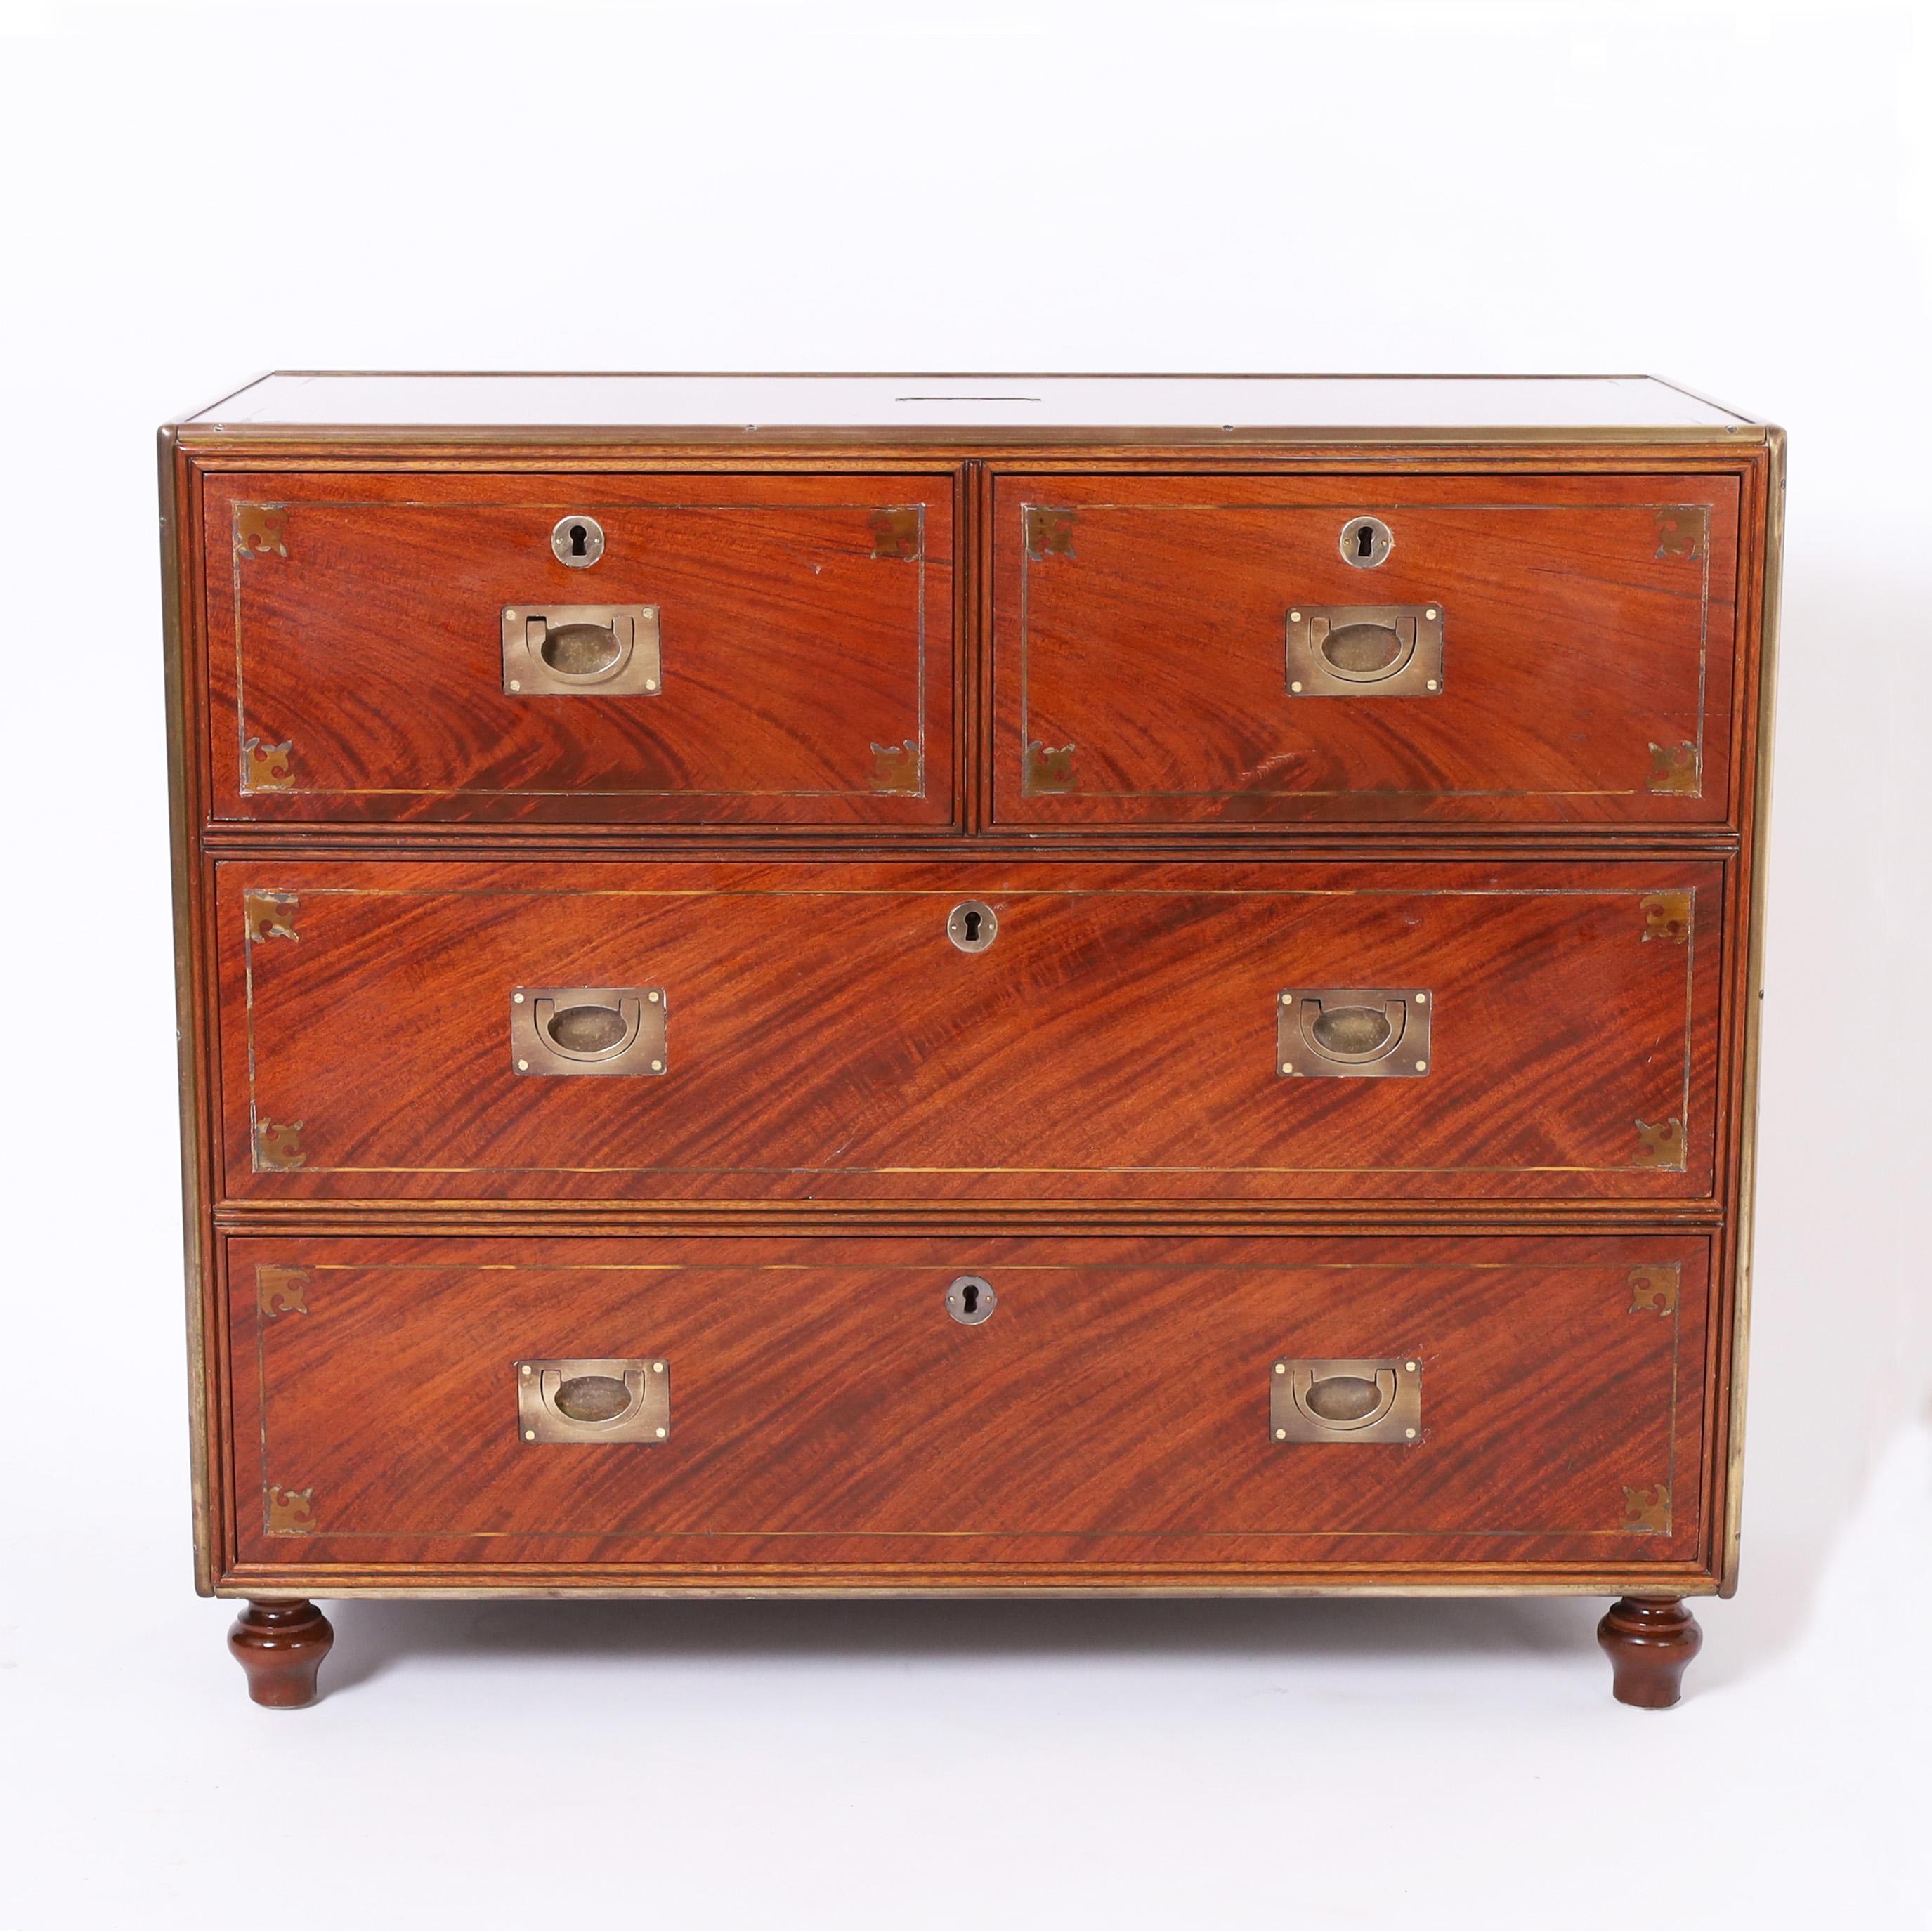 Intriguing antique campaign style chest crafted in mahogany with well placed dramatic grains, brass inlays and hardware, keys for all drawers and turned feet. Reputedly made from reclaimed wood from the paddle steamer 